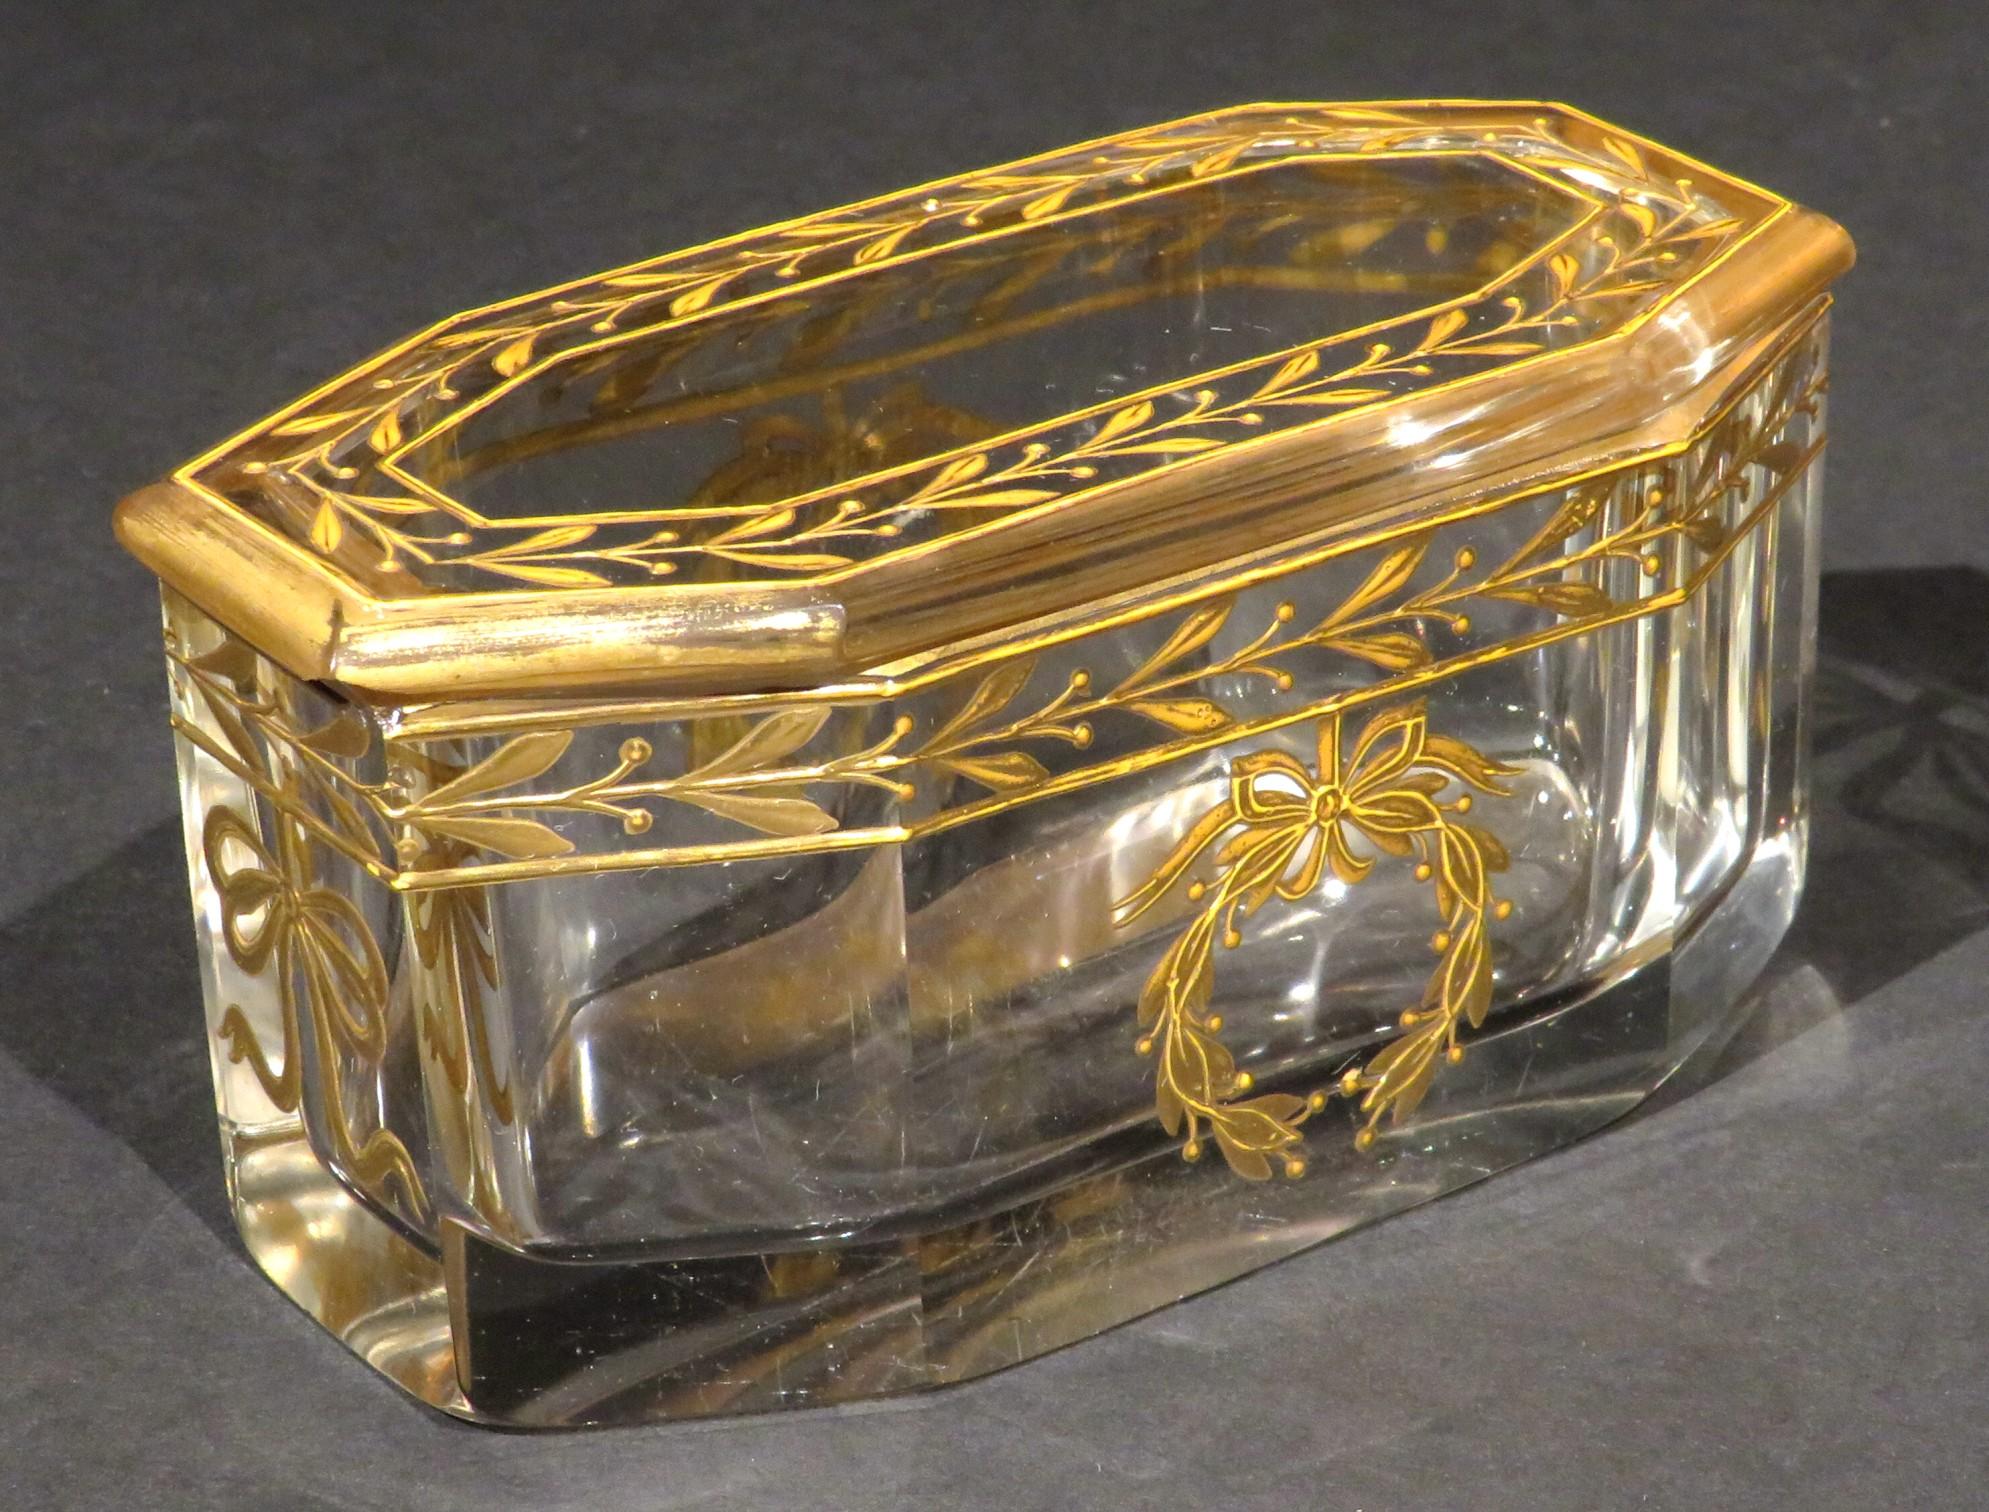 Neoclassical Revival Fine Early 20th Century Gilt Decorated Glass Dresser Jar or Box, Circa 1920 For Sale